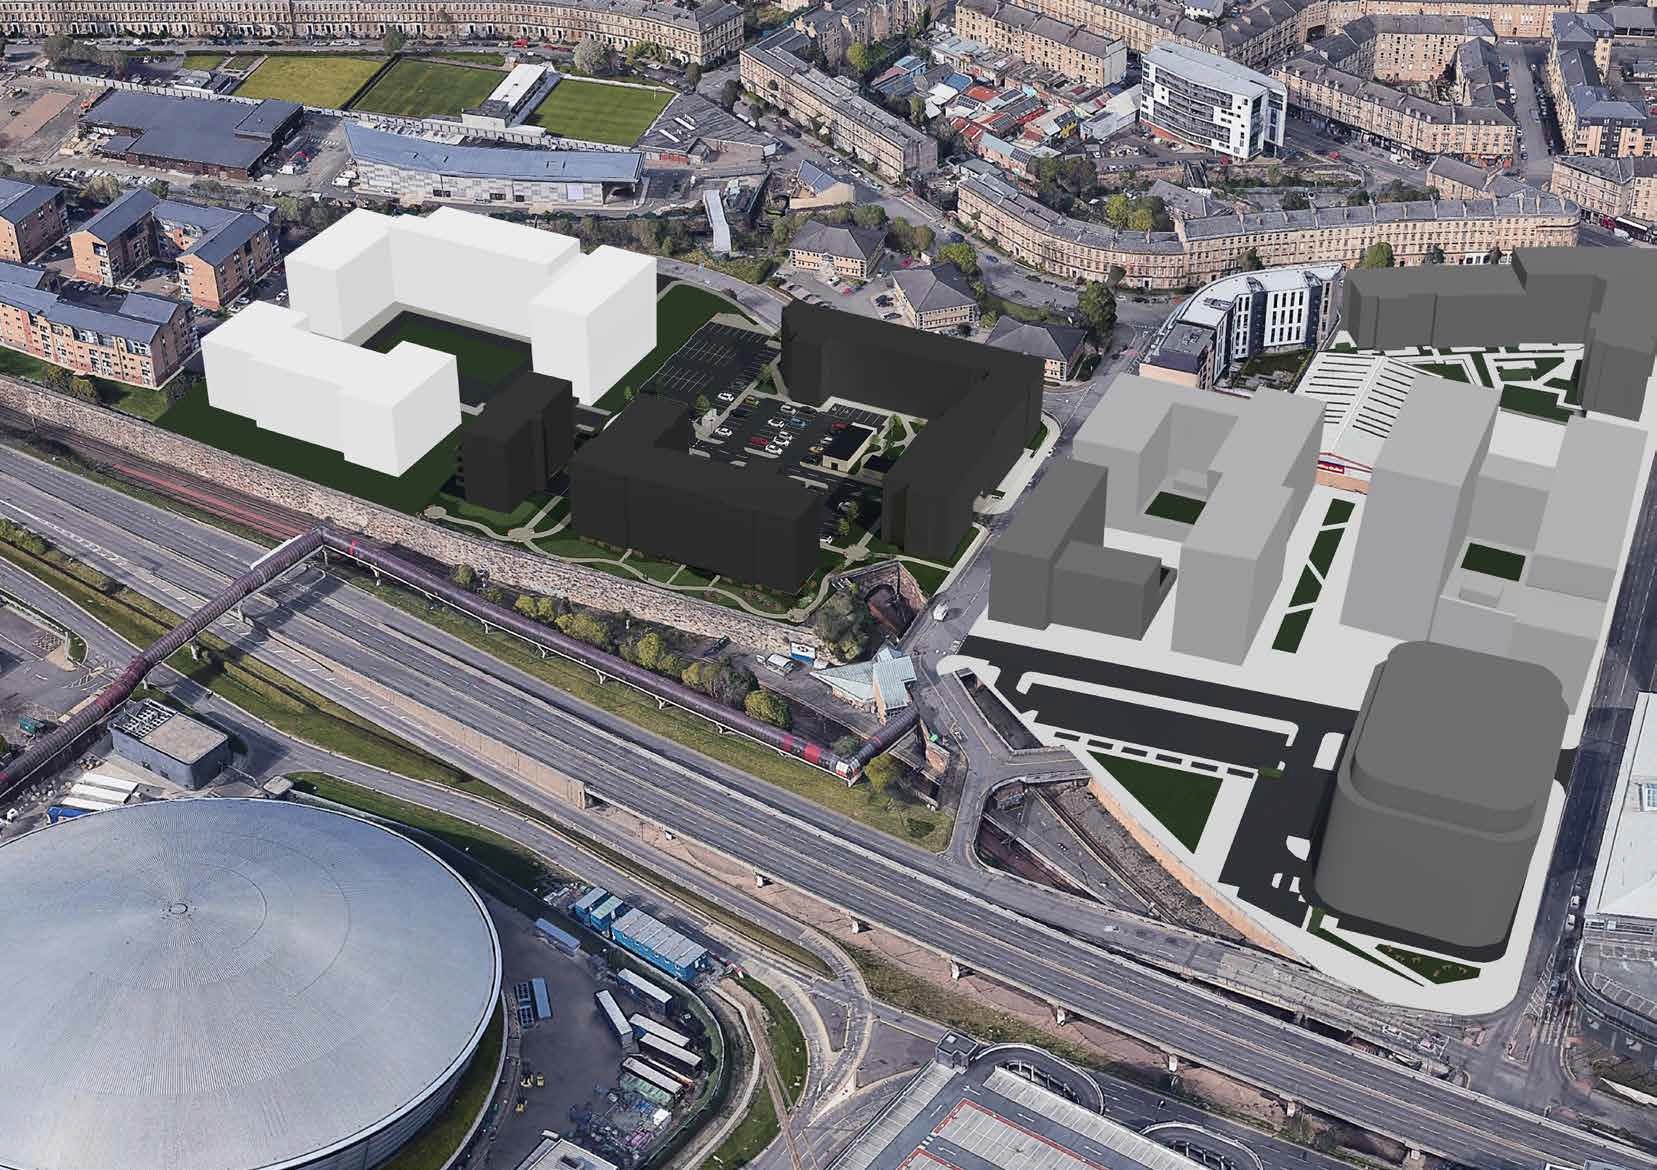 Finnieston gym site reimagined as ‘lush green' Build to Rent development